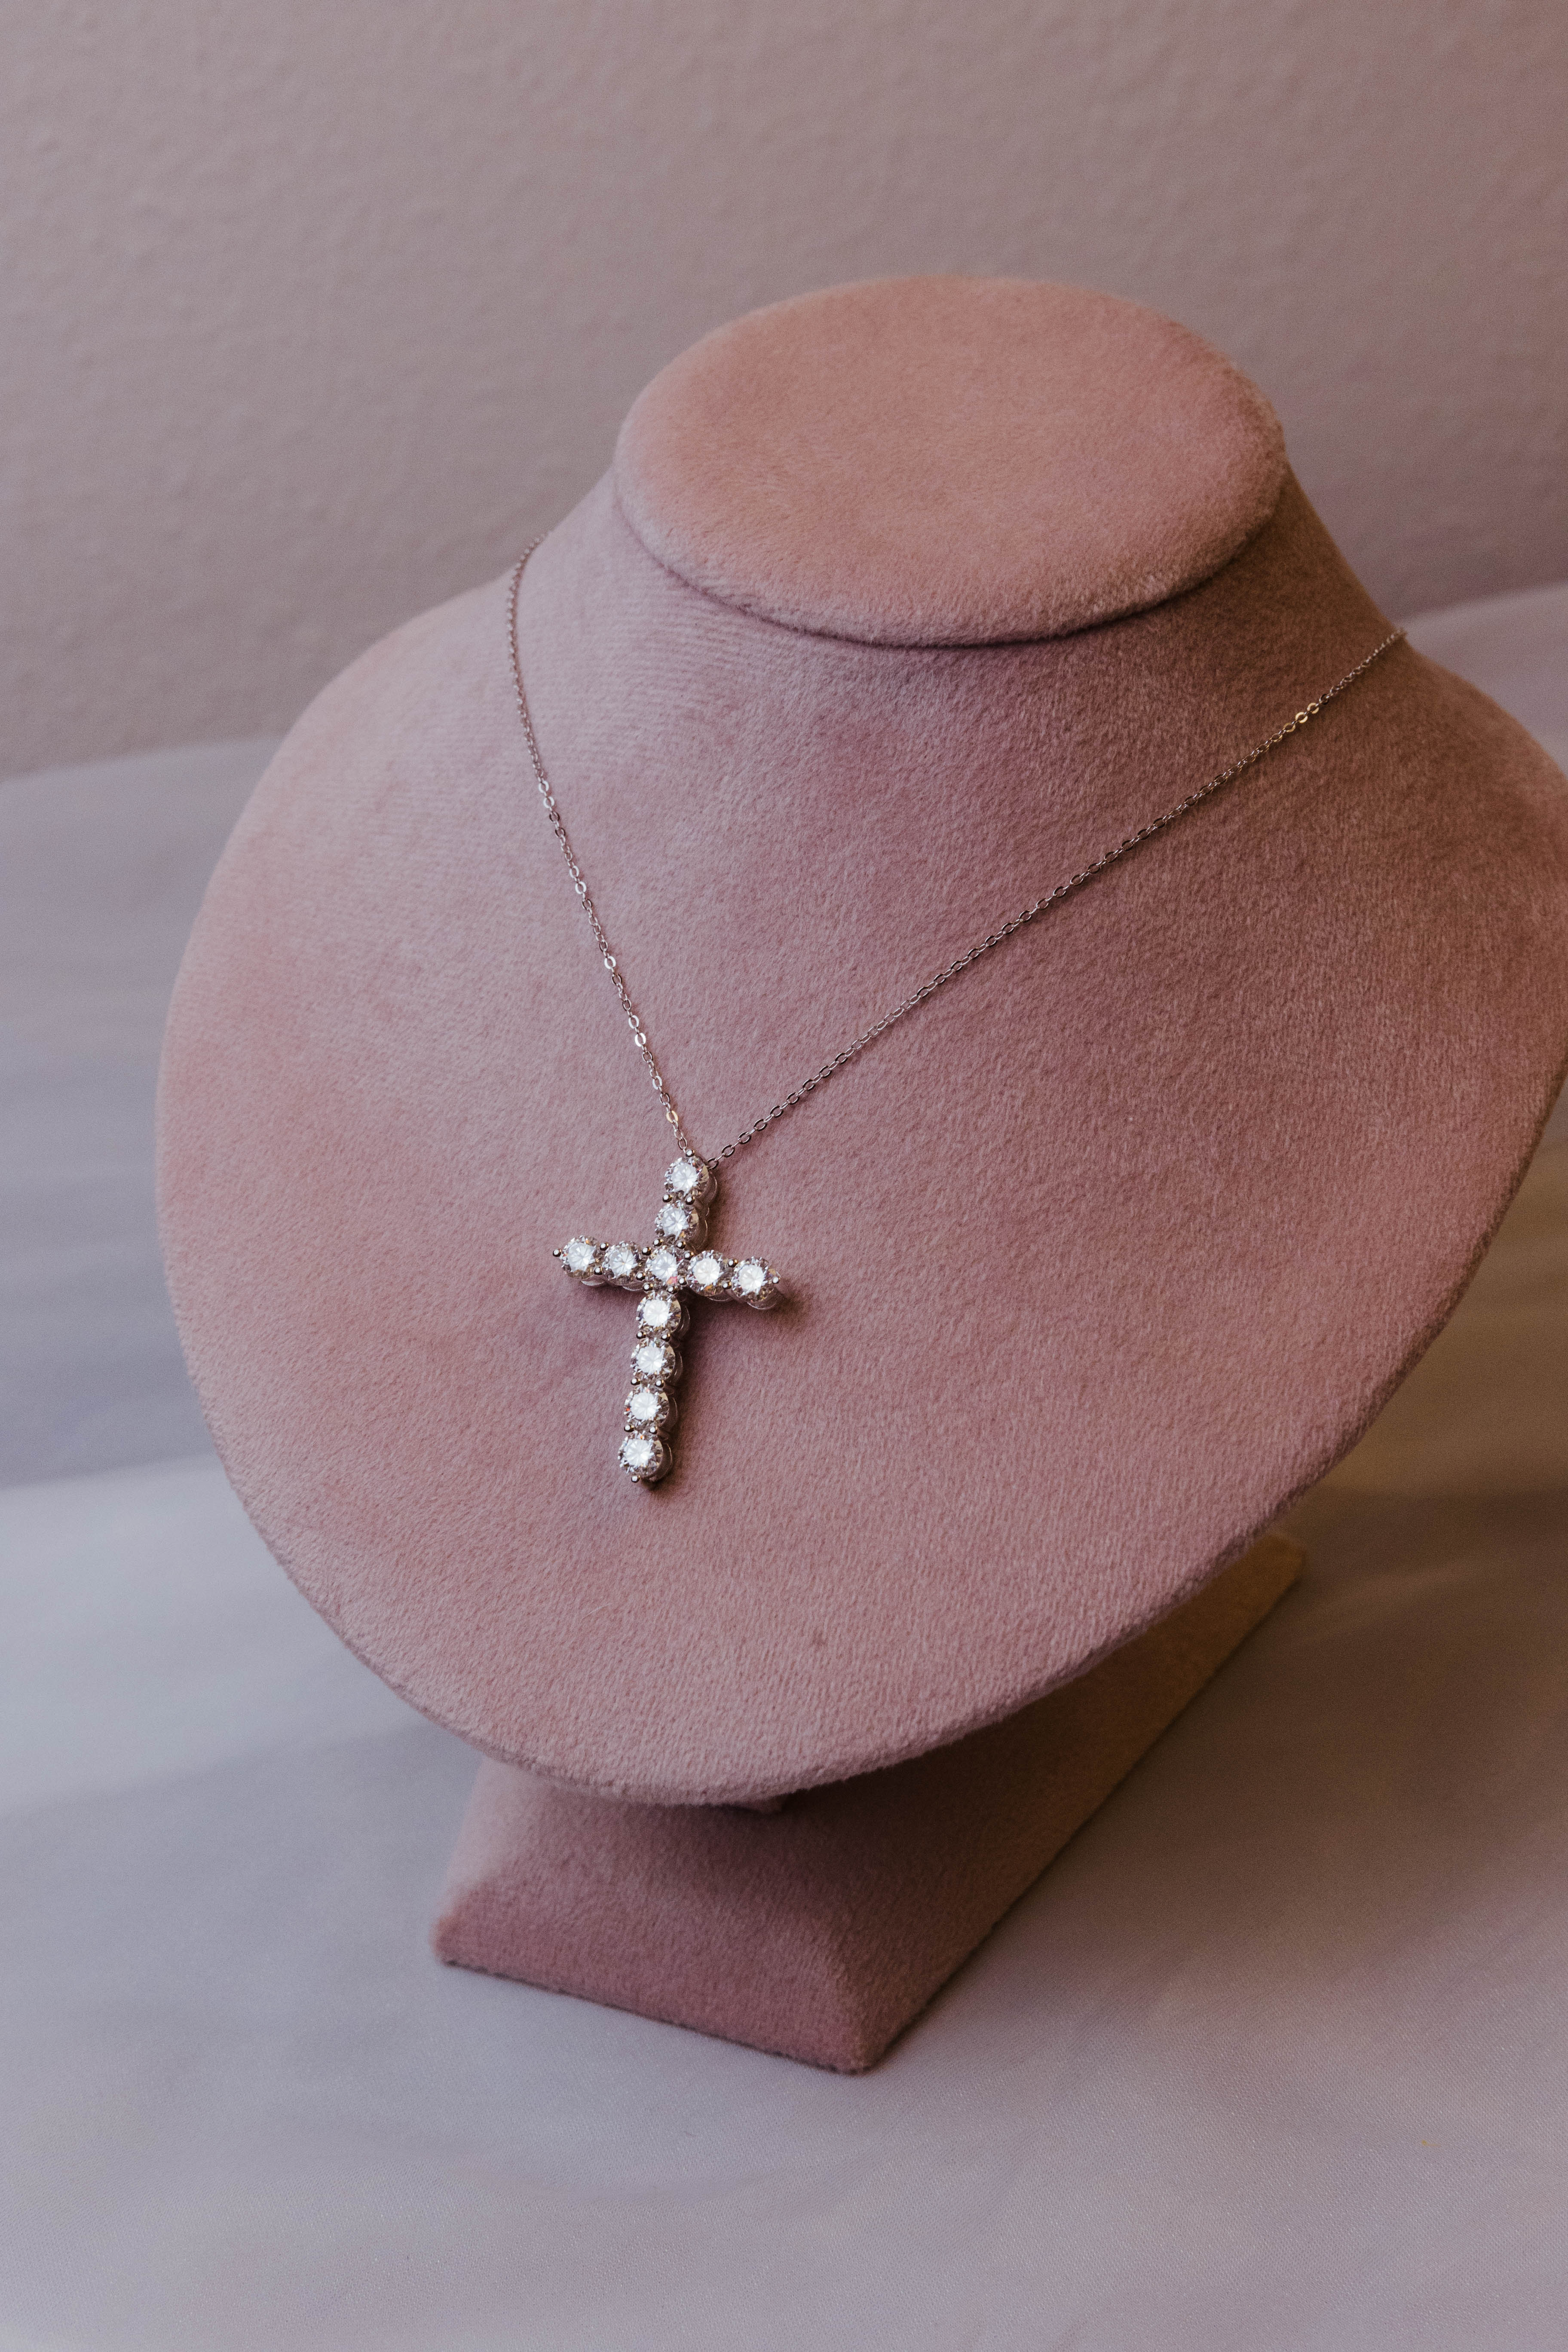 Donatella .925 Sterling Silver Moissanite Cross Necklace **READY TO SHIP**